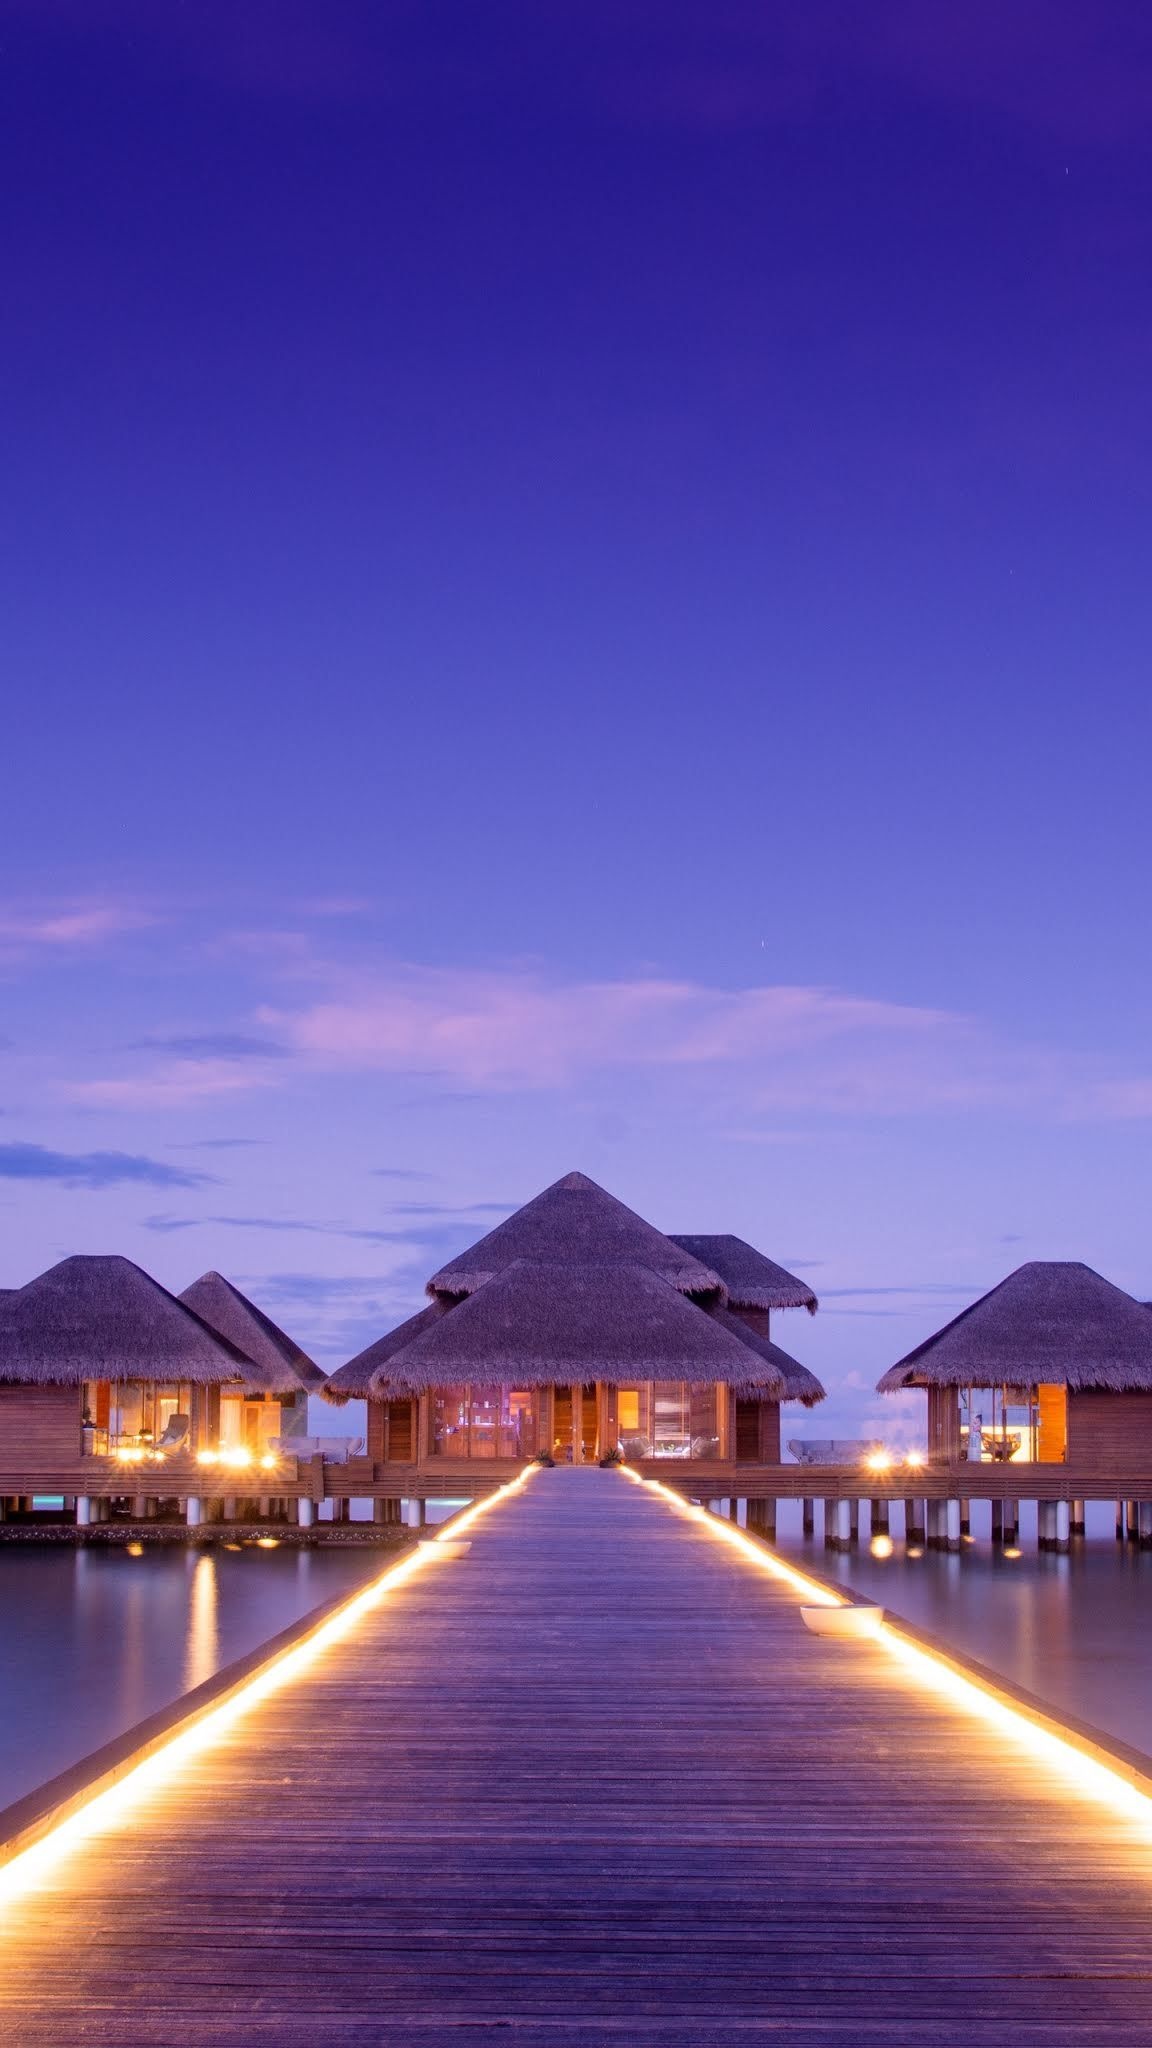 Bungalow: A group of overwater beach houses, Popular resort, Ocean coast during the sunset. 1160x2050 HD Background.